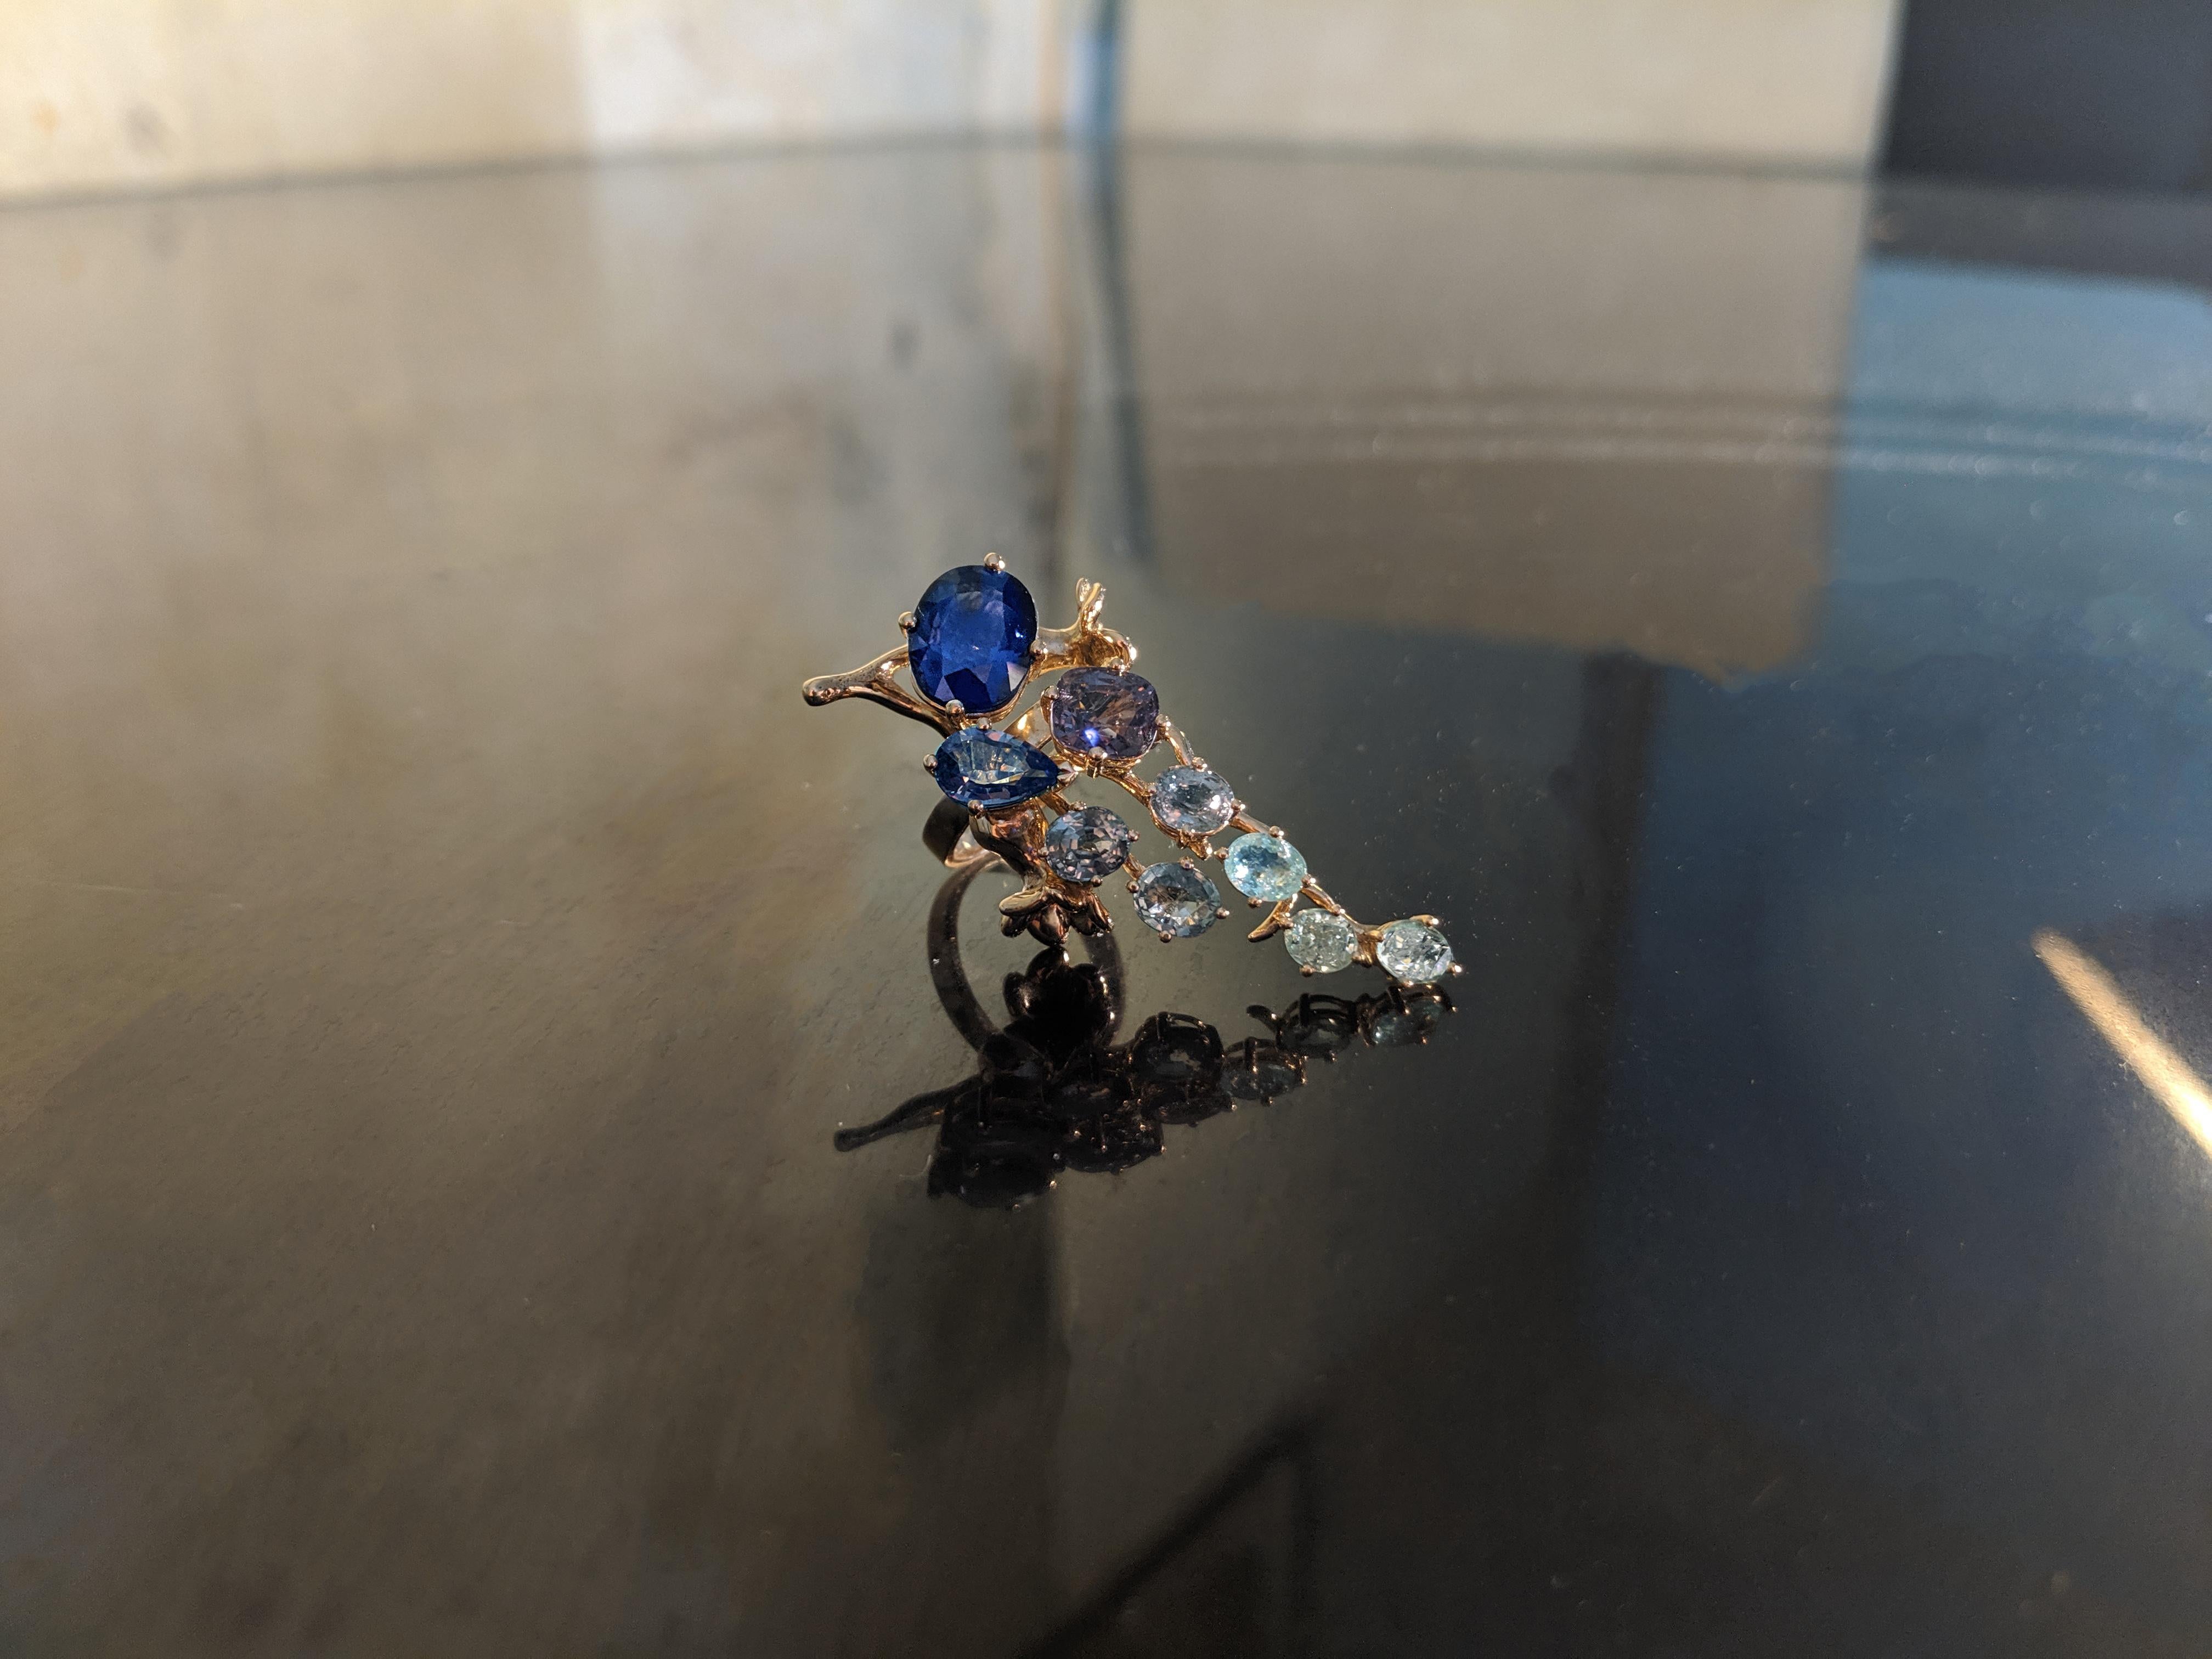 The center of this 18 karat rose gold Tobacco Flower Engagement Cluster Ring is a GRS certified 5.23 carat vivid royal blue oval sapphire from Sri Lanka, a very precious gem that can only be set in such a delicate design. The dimensions of the